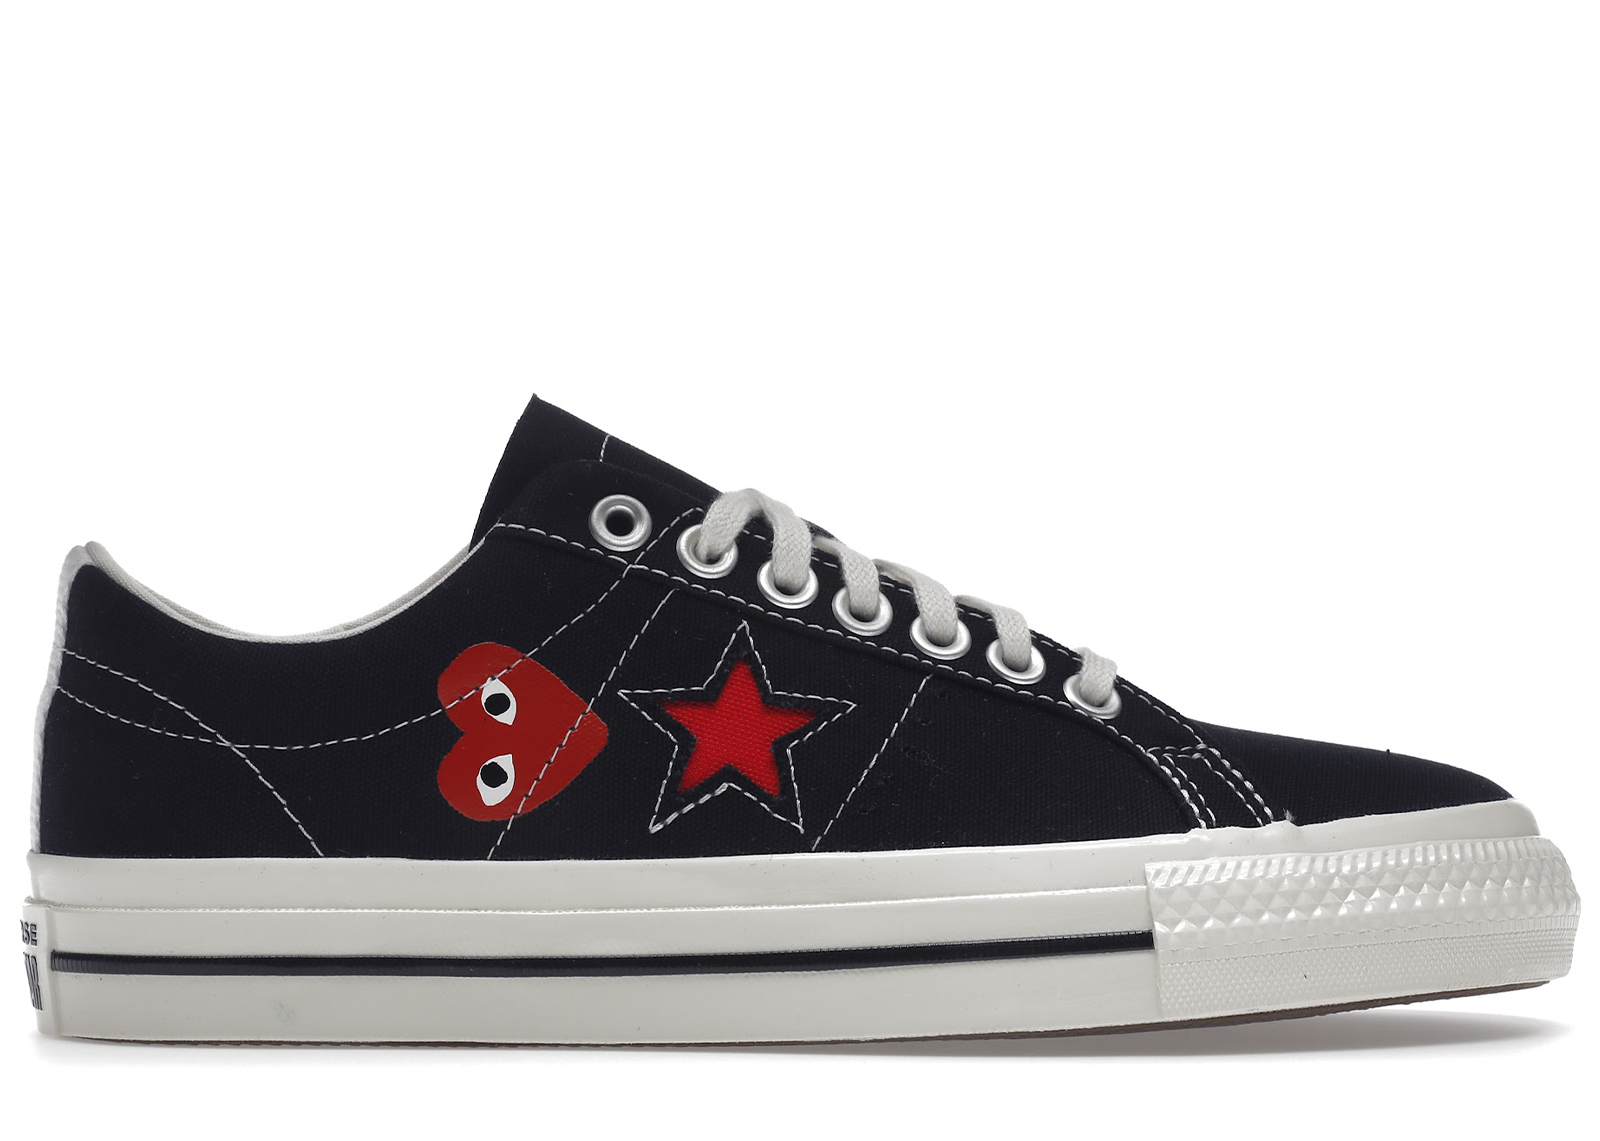 Converse One Star Ox Comme des Garcons PLAY Black - A01791C - US